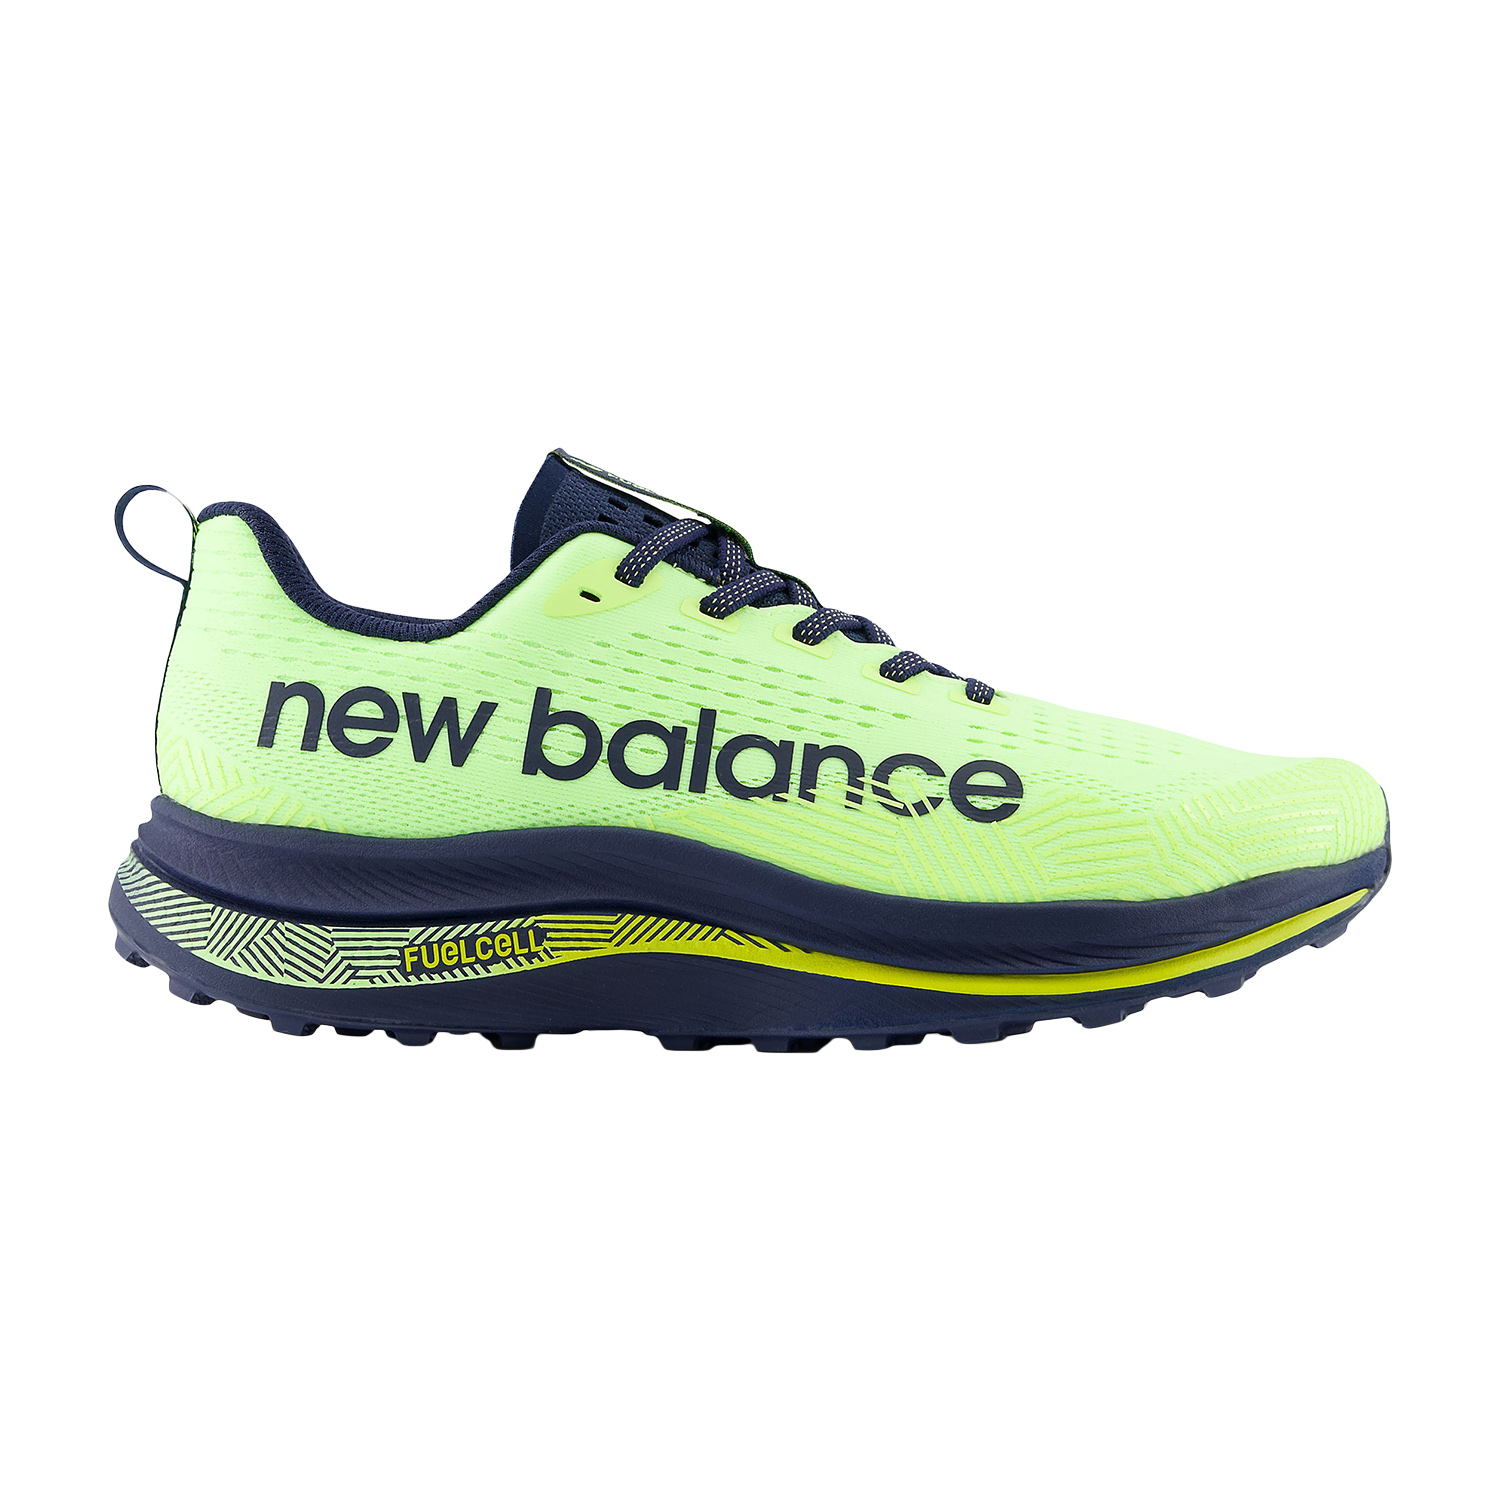 NEW BALANCE FUELCELL SUPERCOMP TRAIL - MisterRunning